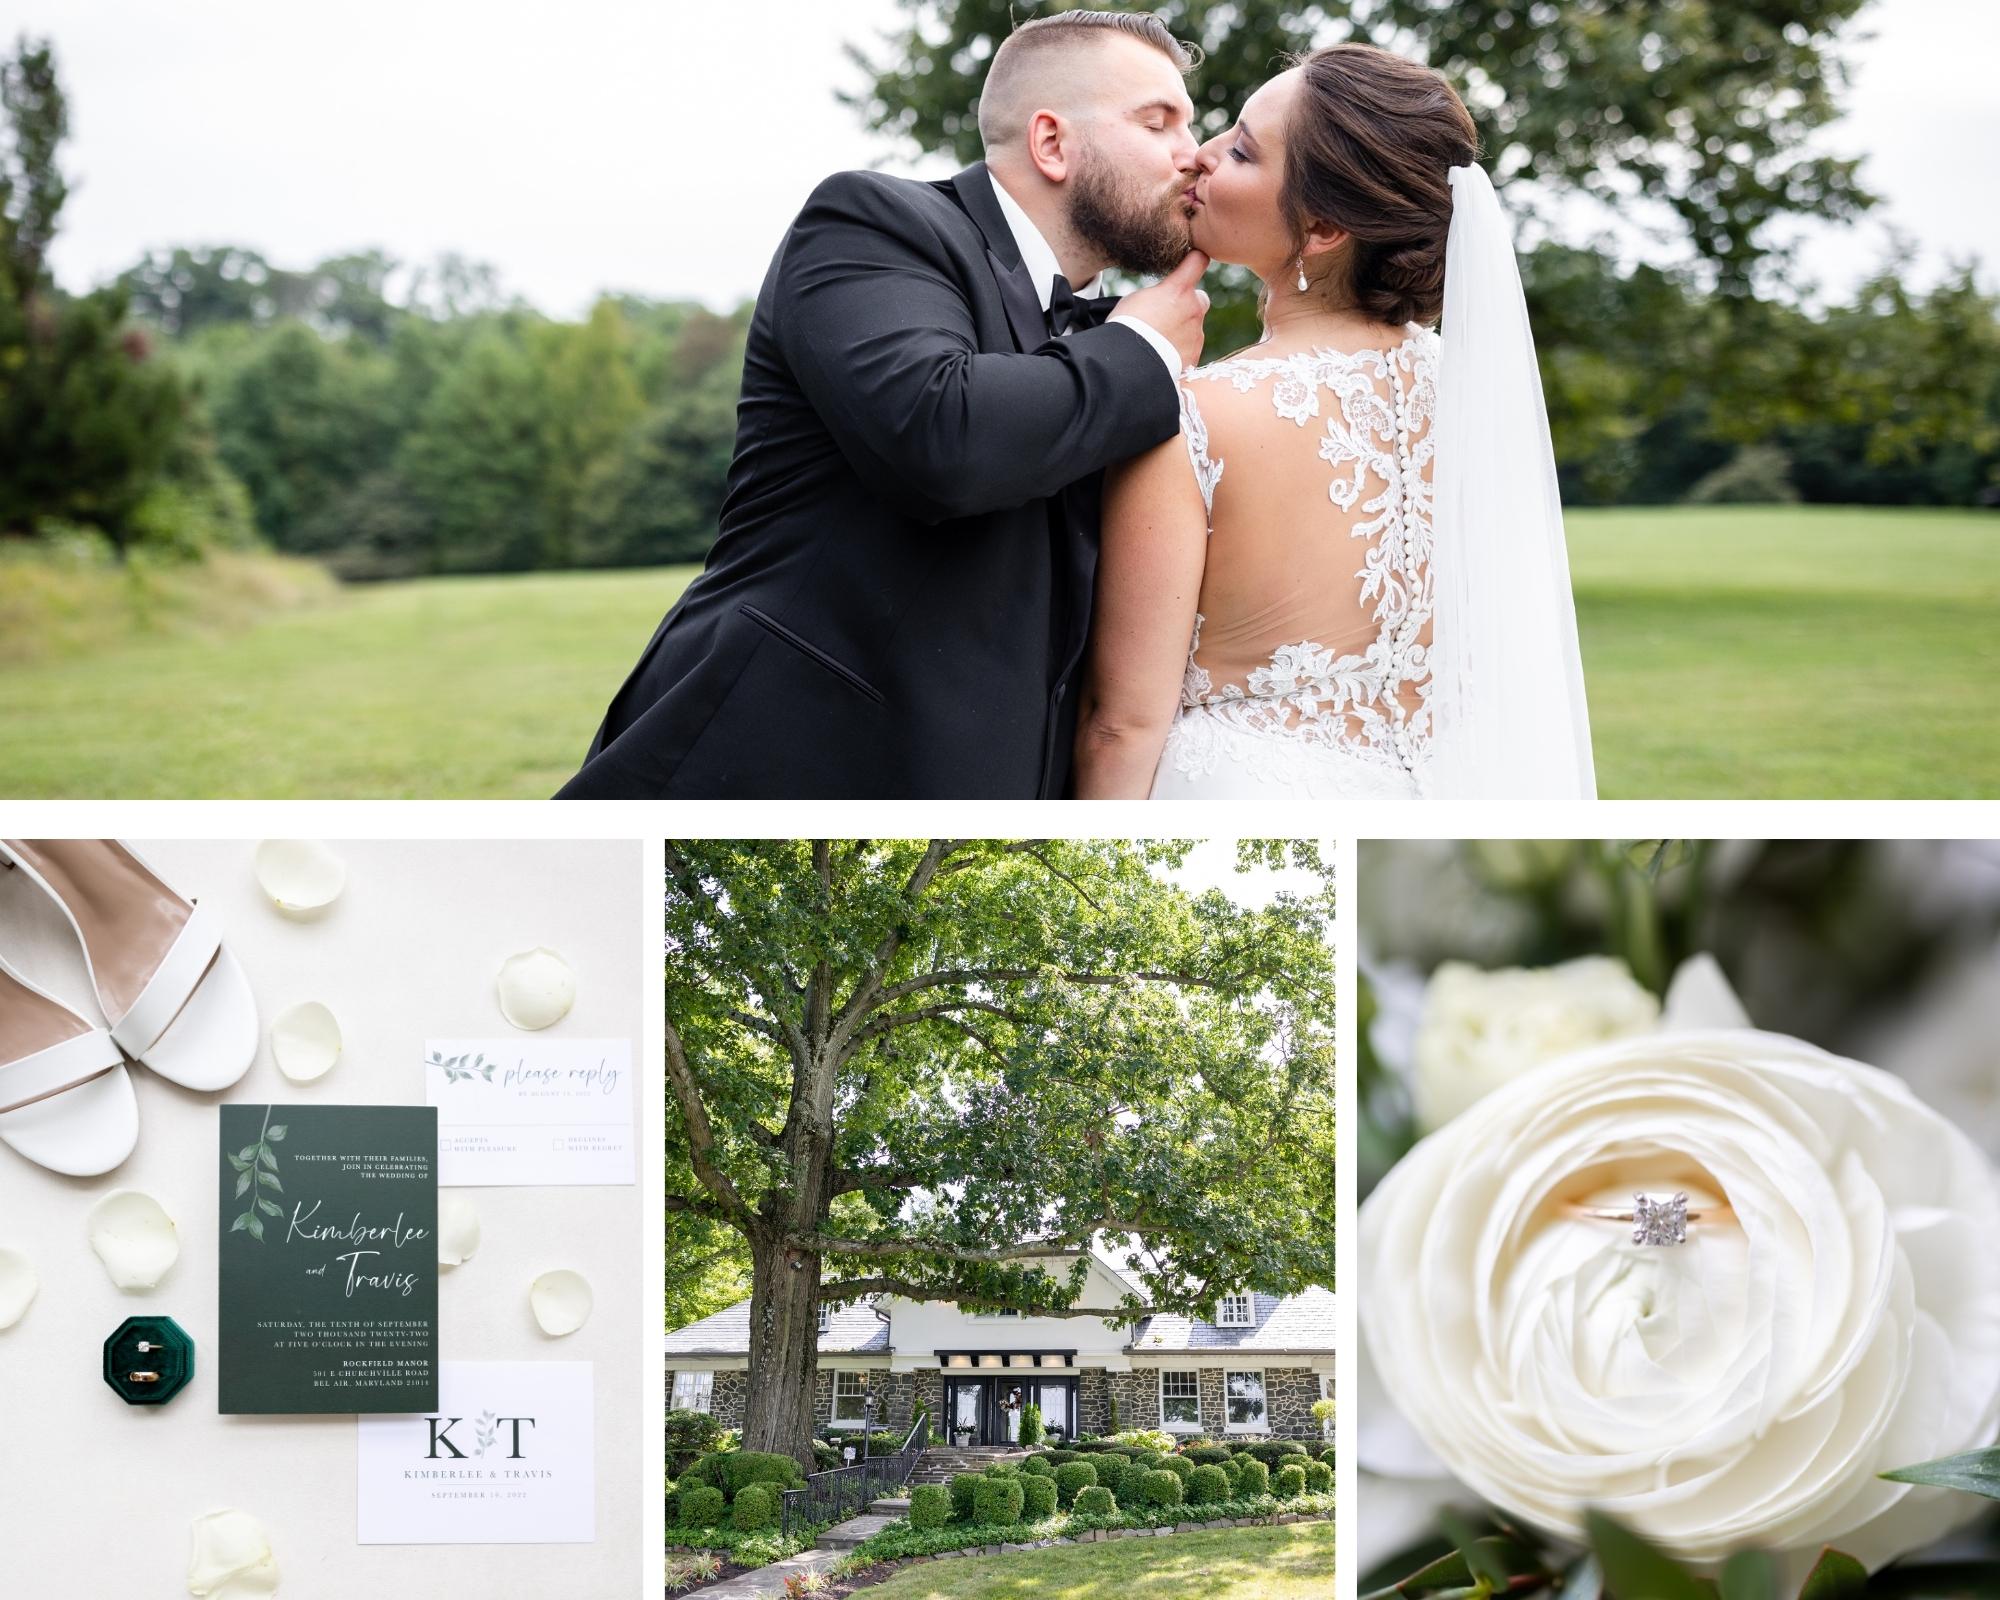 Collection of Luxury Wedding Photographs from Rockfield Manor in Bel Air, MD - Luxury Wedding Photographer - Wedding Photographer DMV